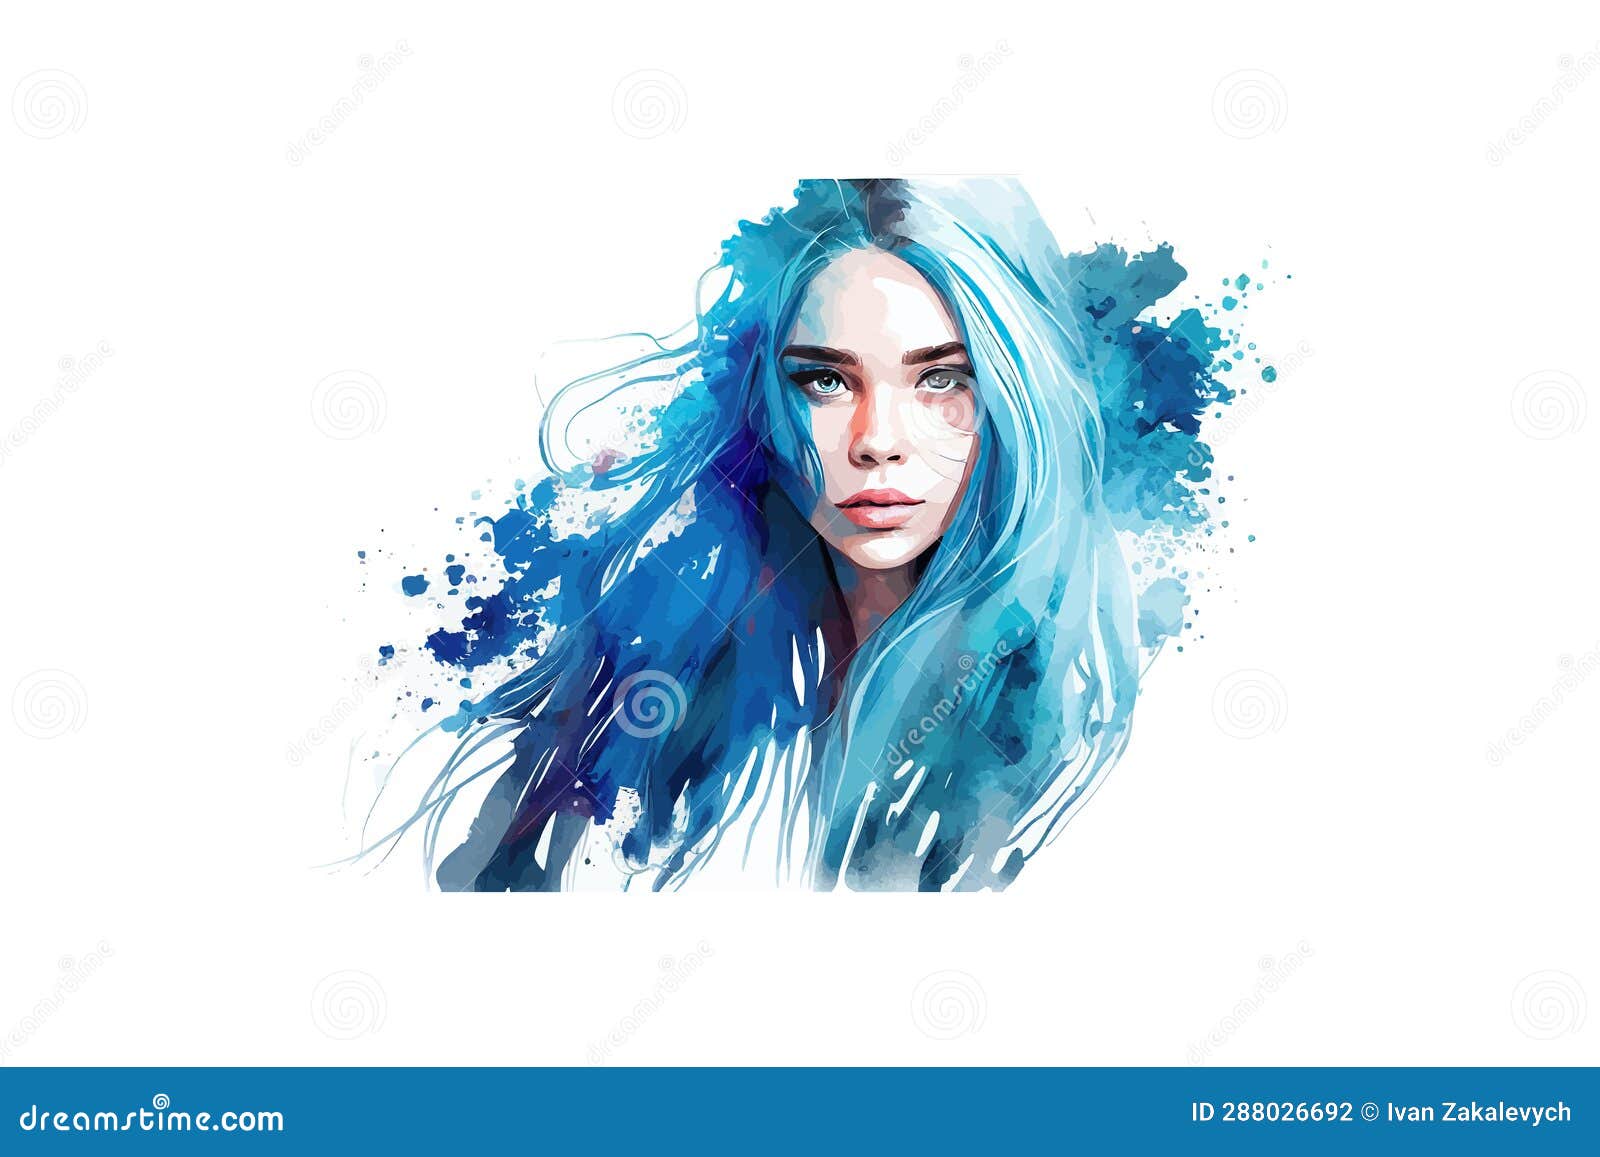 Girl with blue hair in urban setting - wide 3